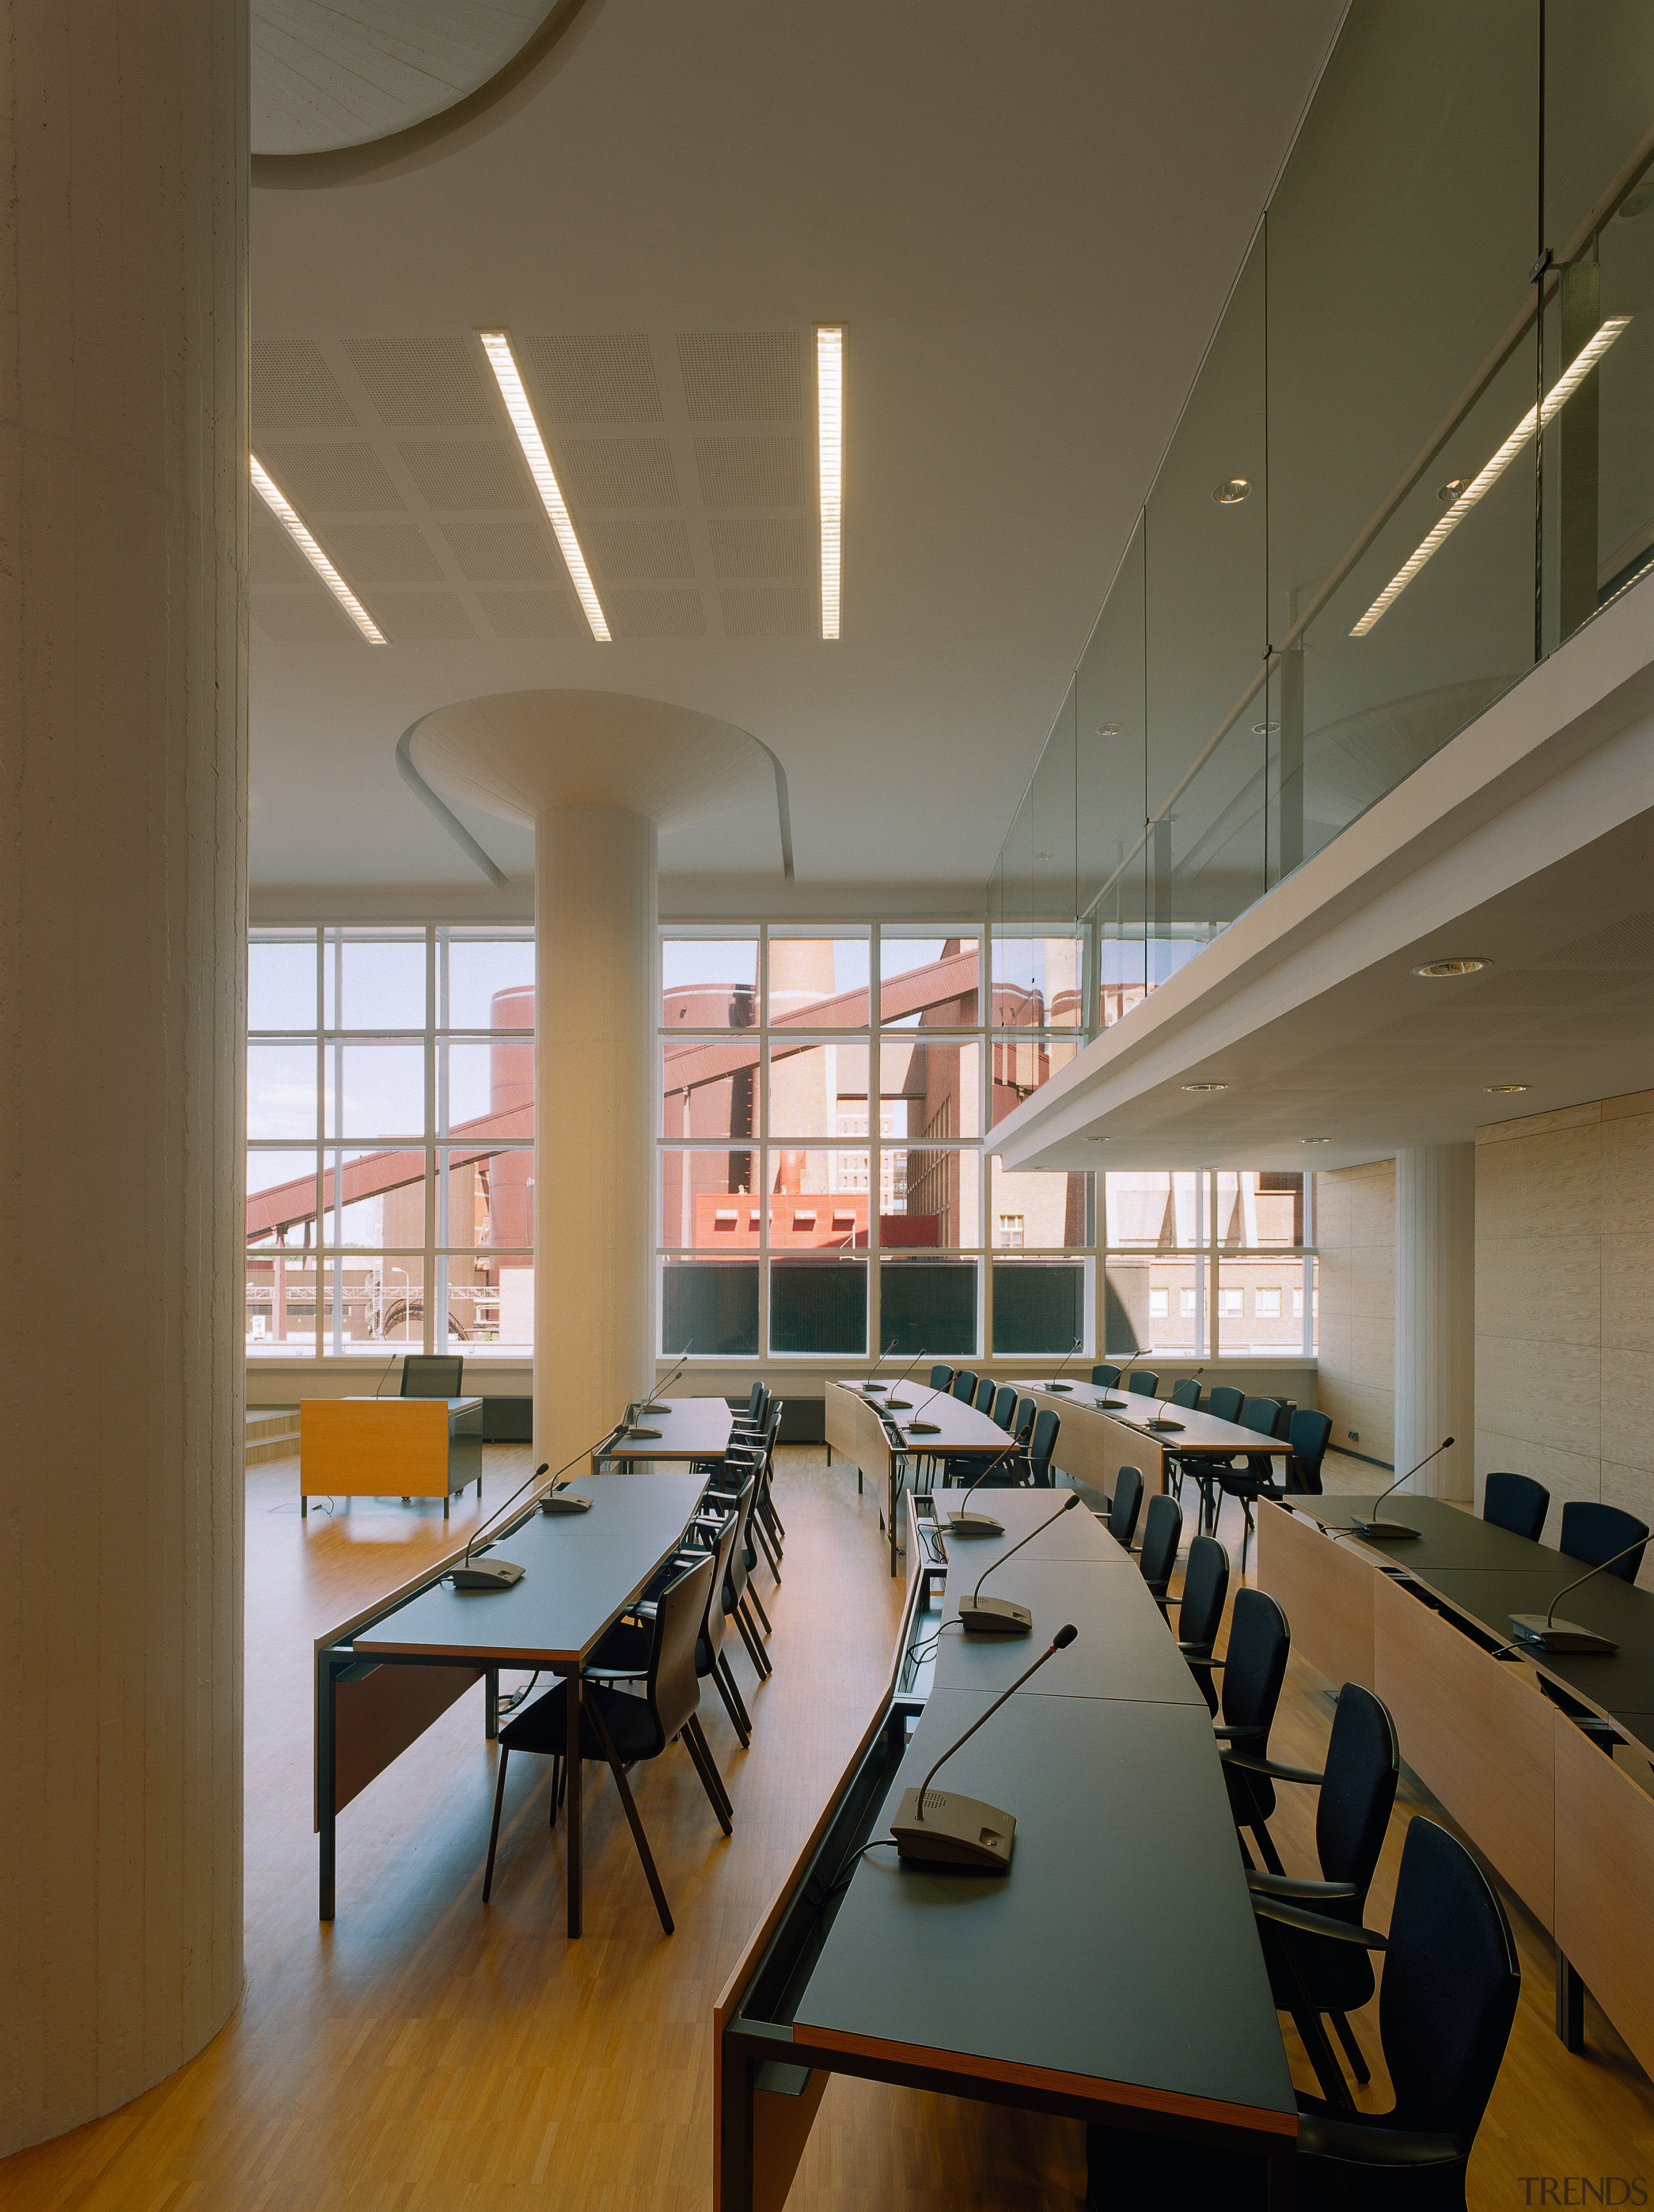 A viewof the conference area. - A viewof architecture, ceiling, classroom, conference hall, daylighting, institution, interior design, office, table, brown